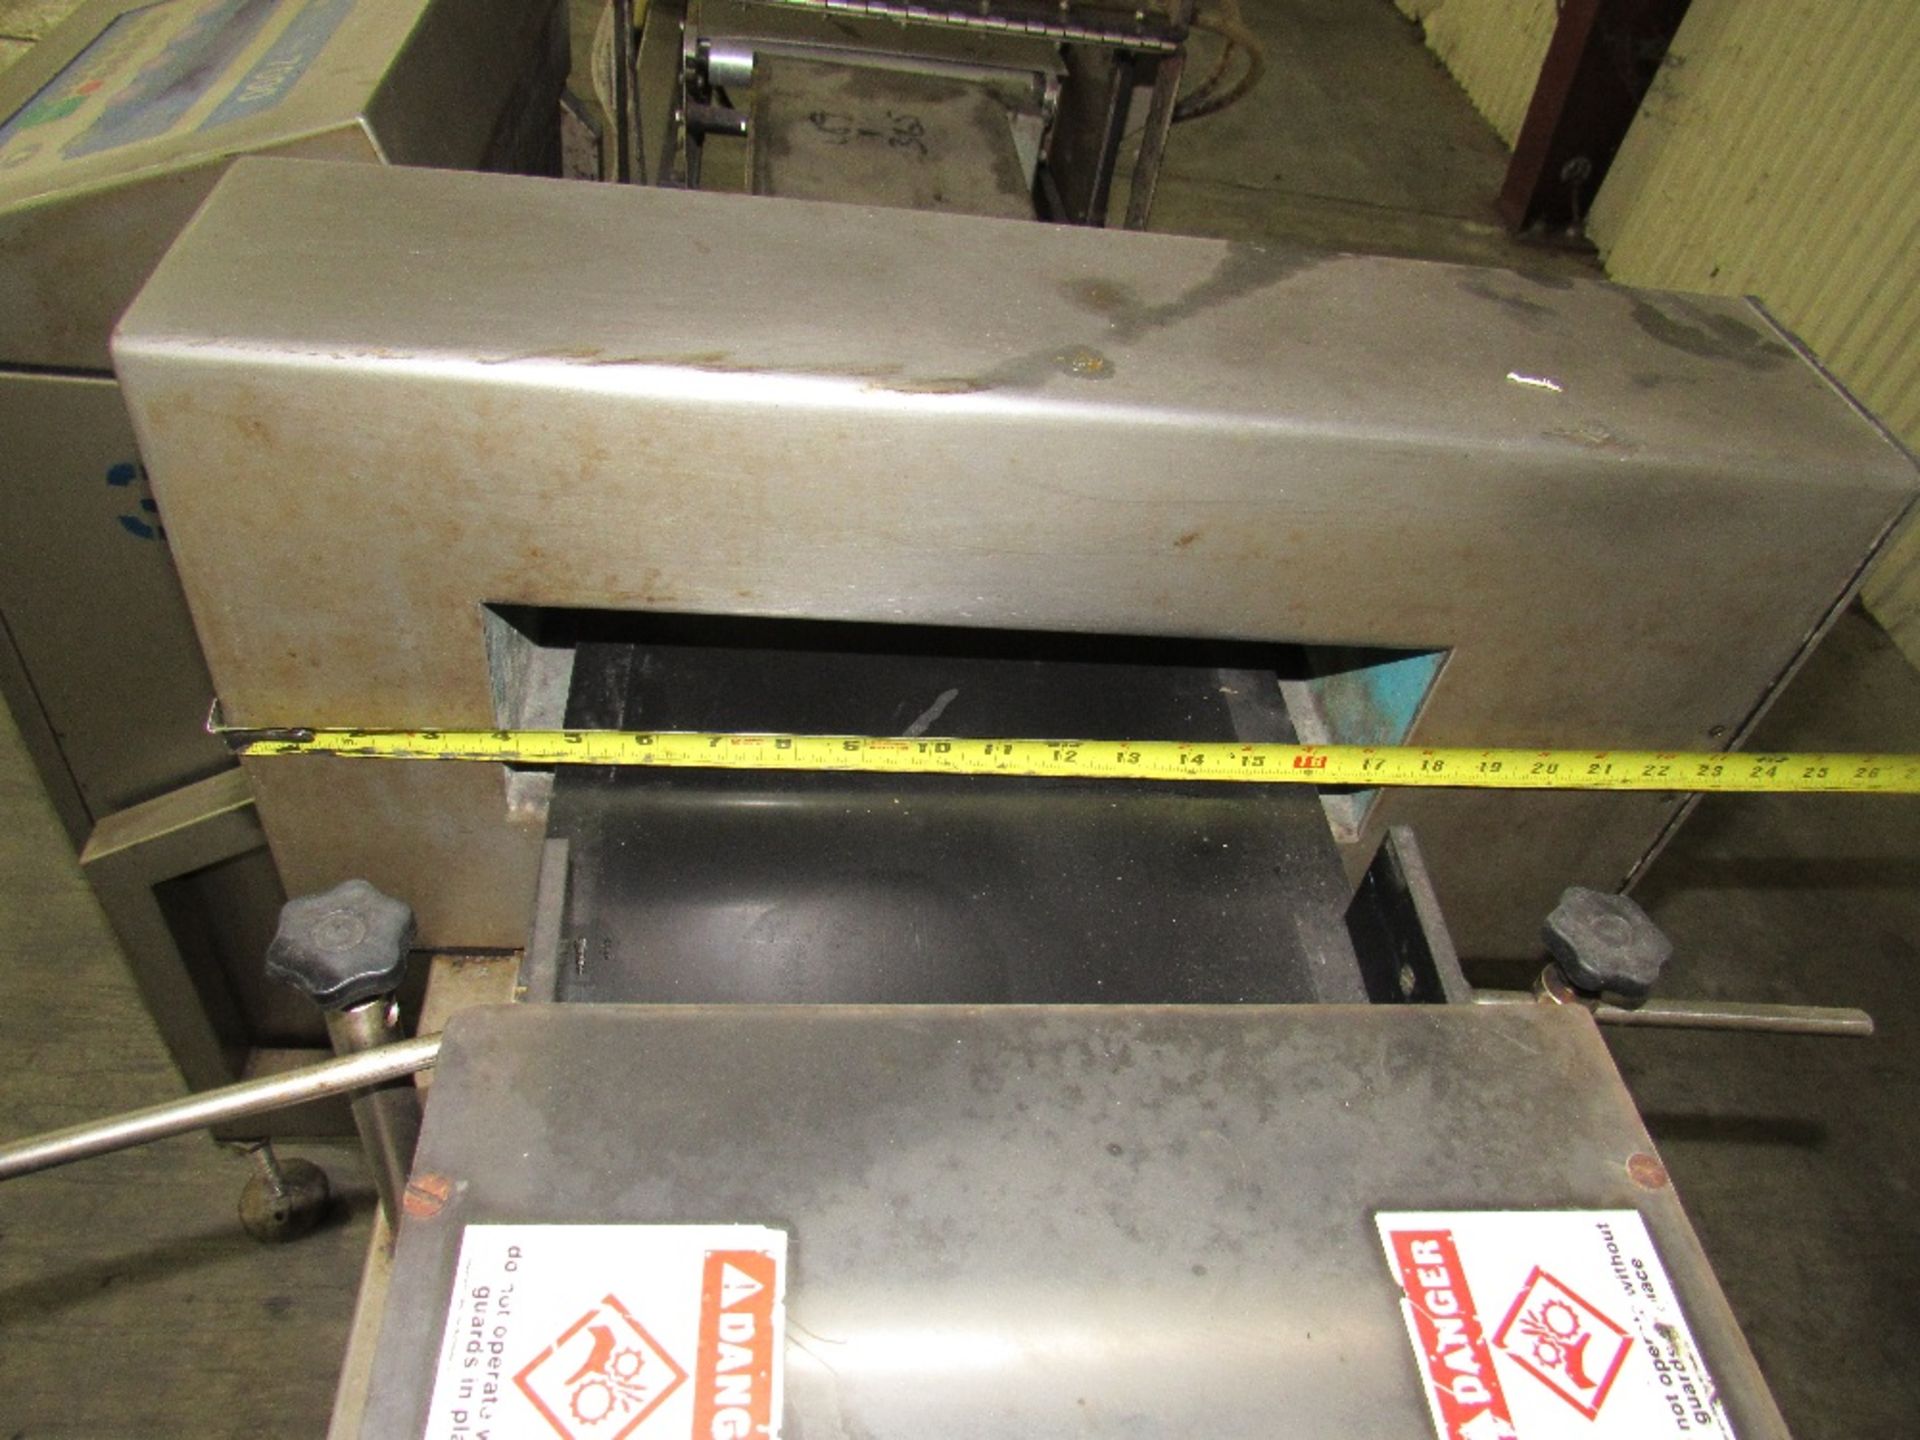 Loma 7000 Staginess Steel Check weigher with built-in 7.5 gallon air tanks and product conveyor - Image 21 of 21